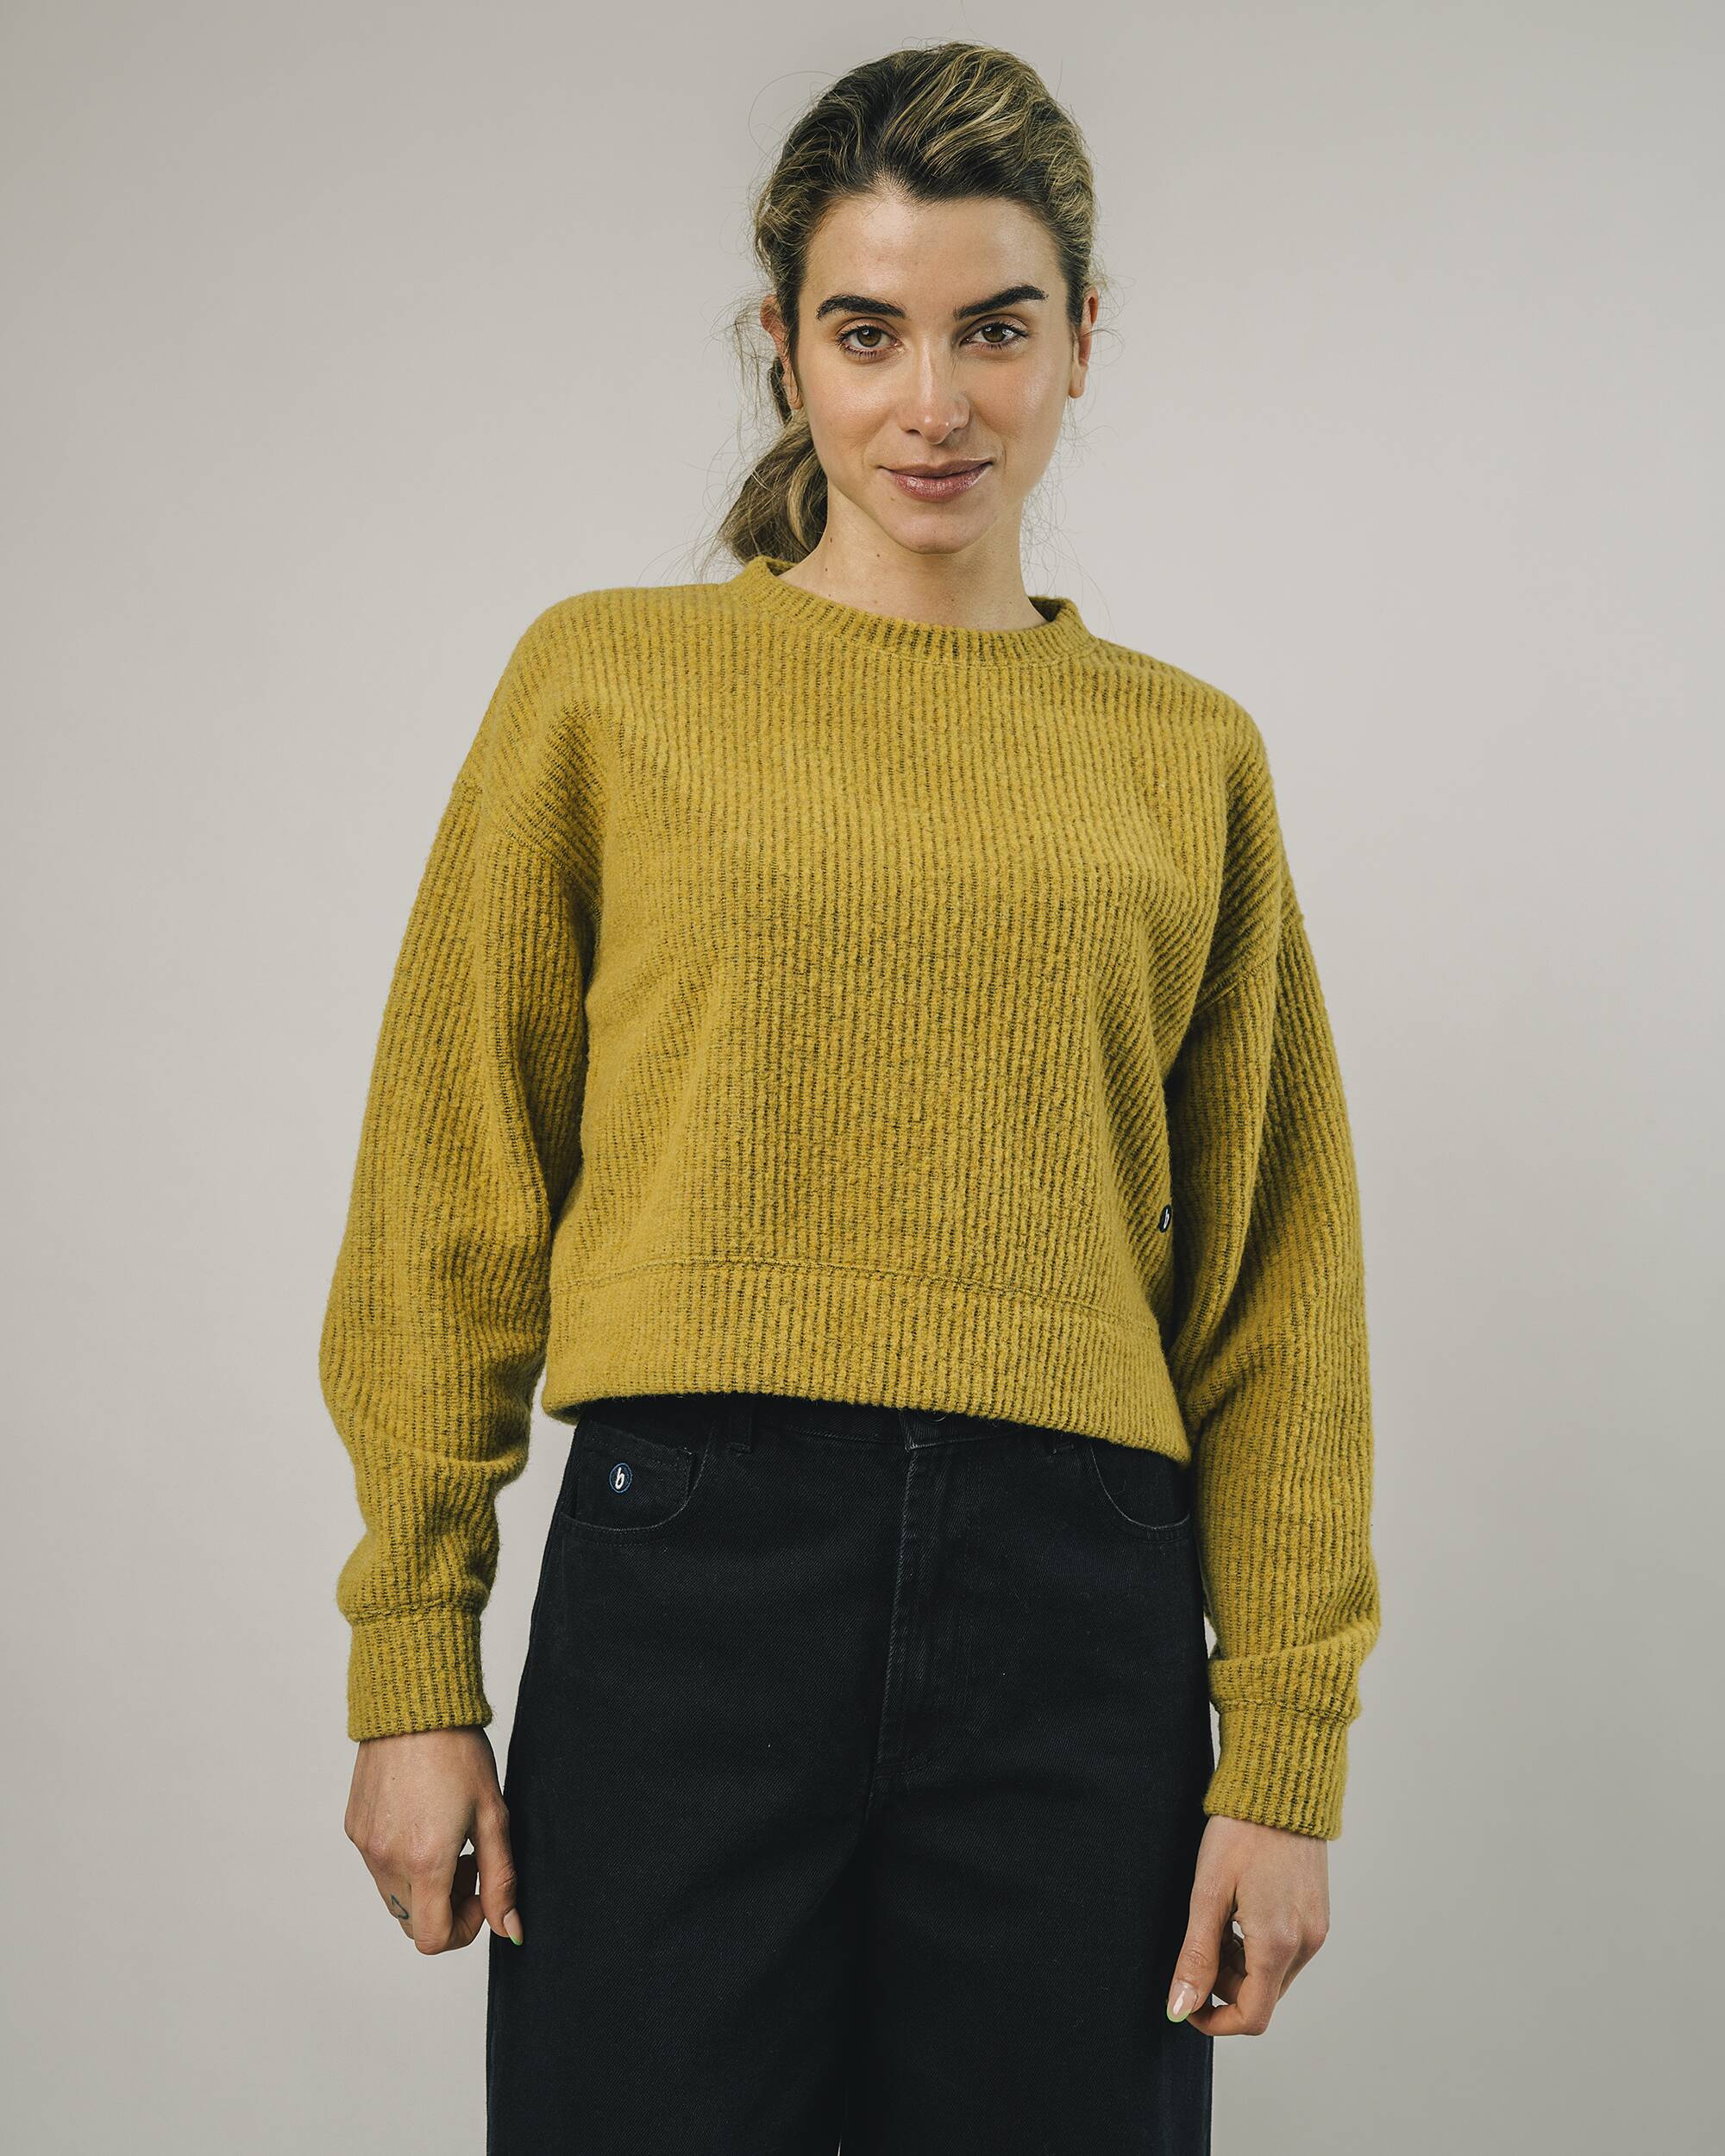 Cropped sweatshirt in mustard - yellow made from 100% recycled materials from Brava Fabrics